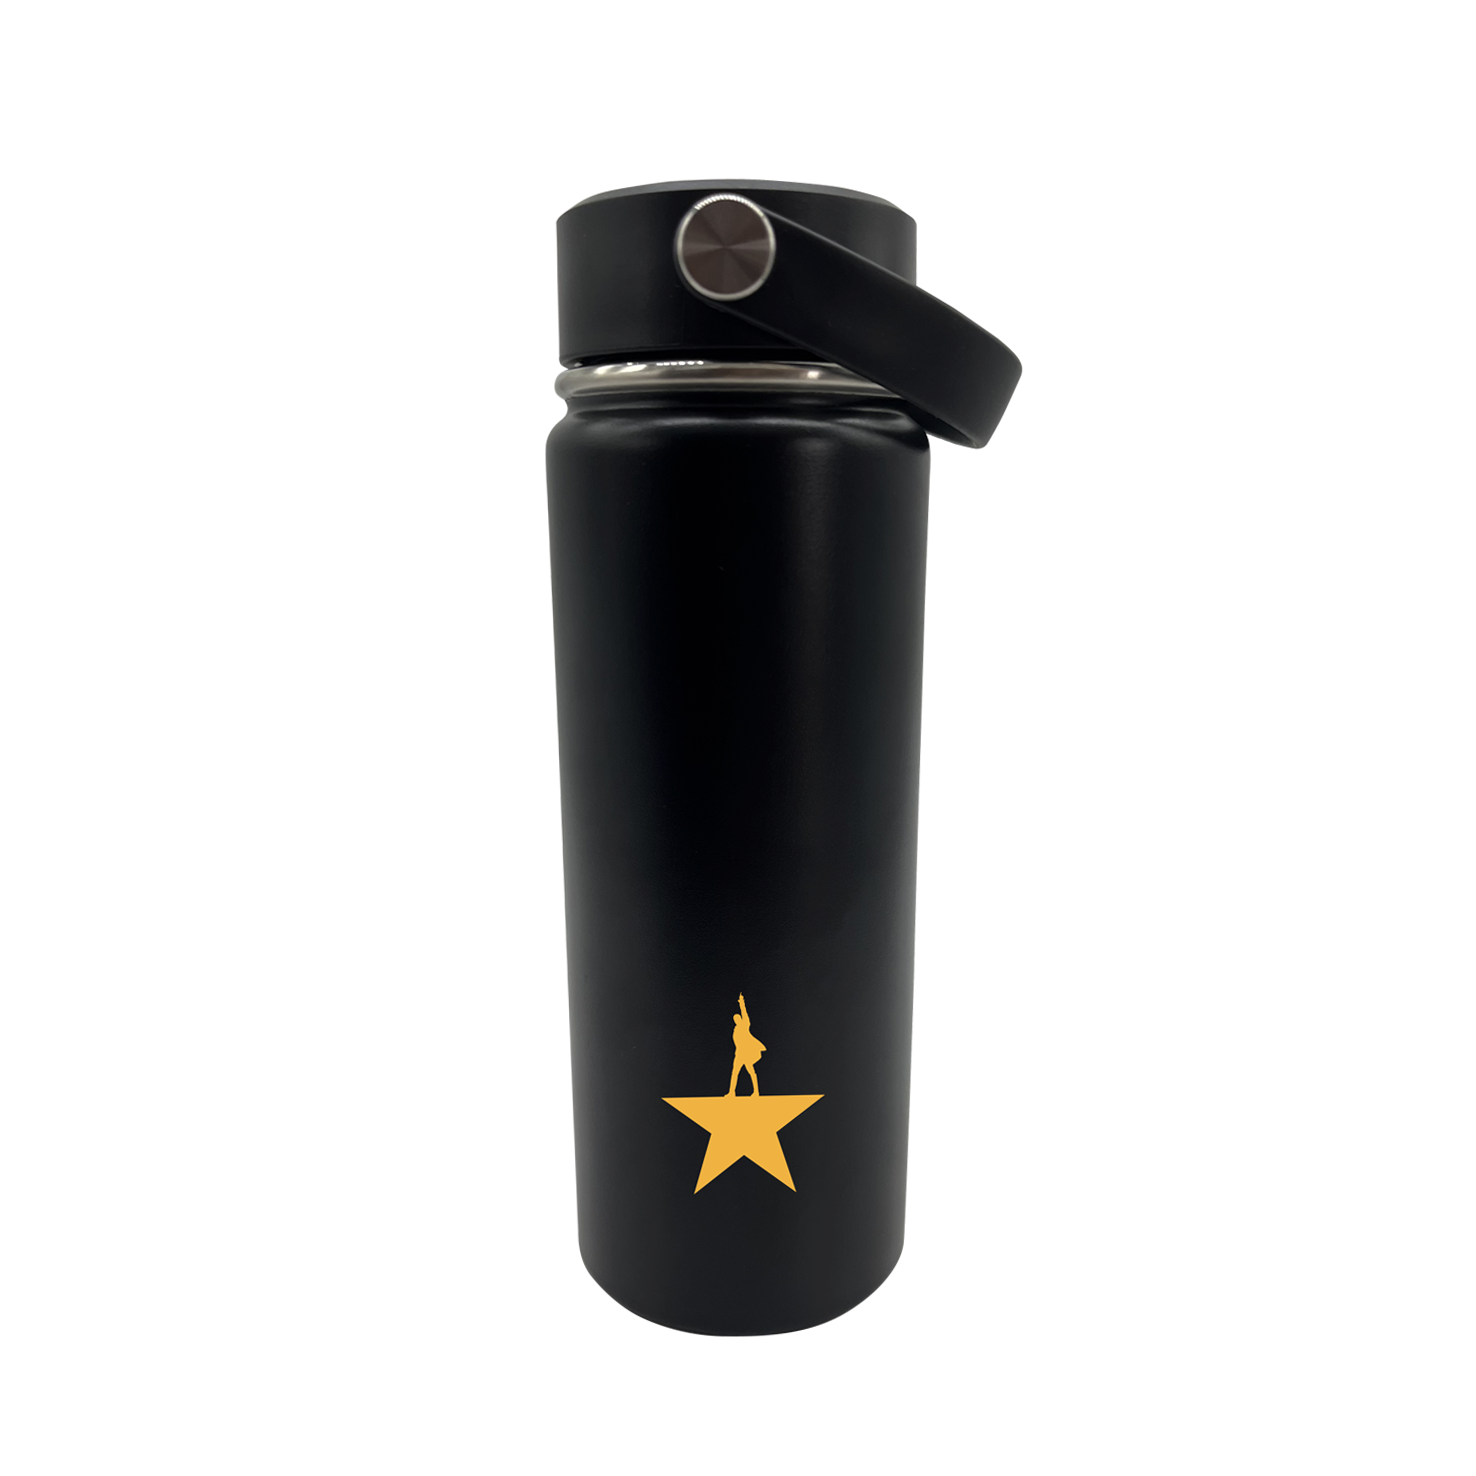 HAMILTON Awesome Wow Water Bottle - Image 3